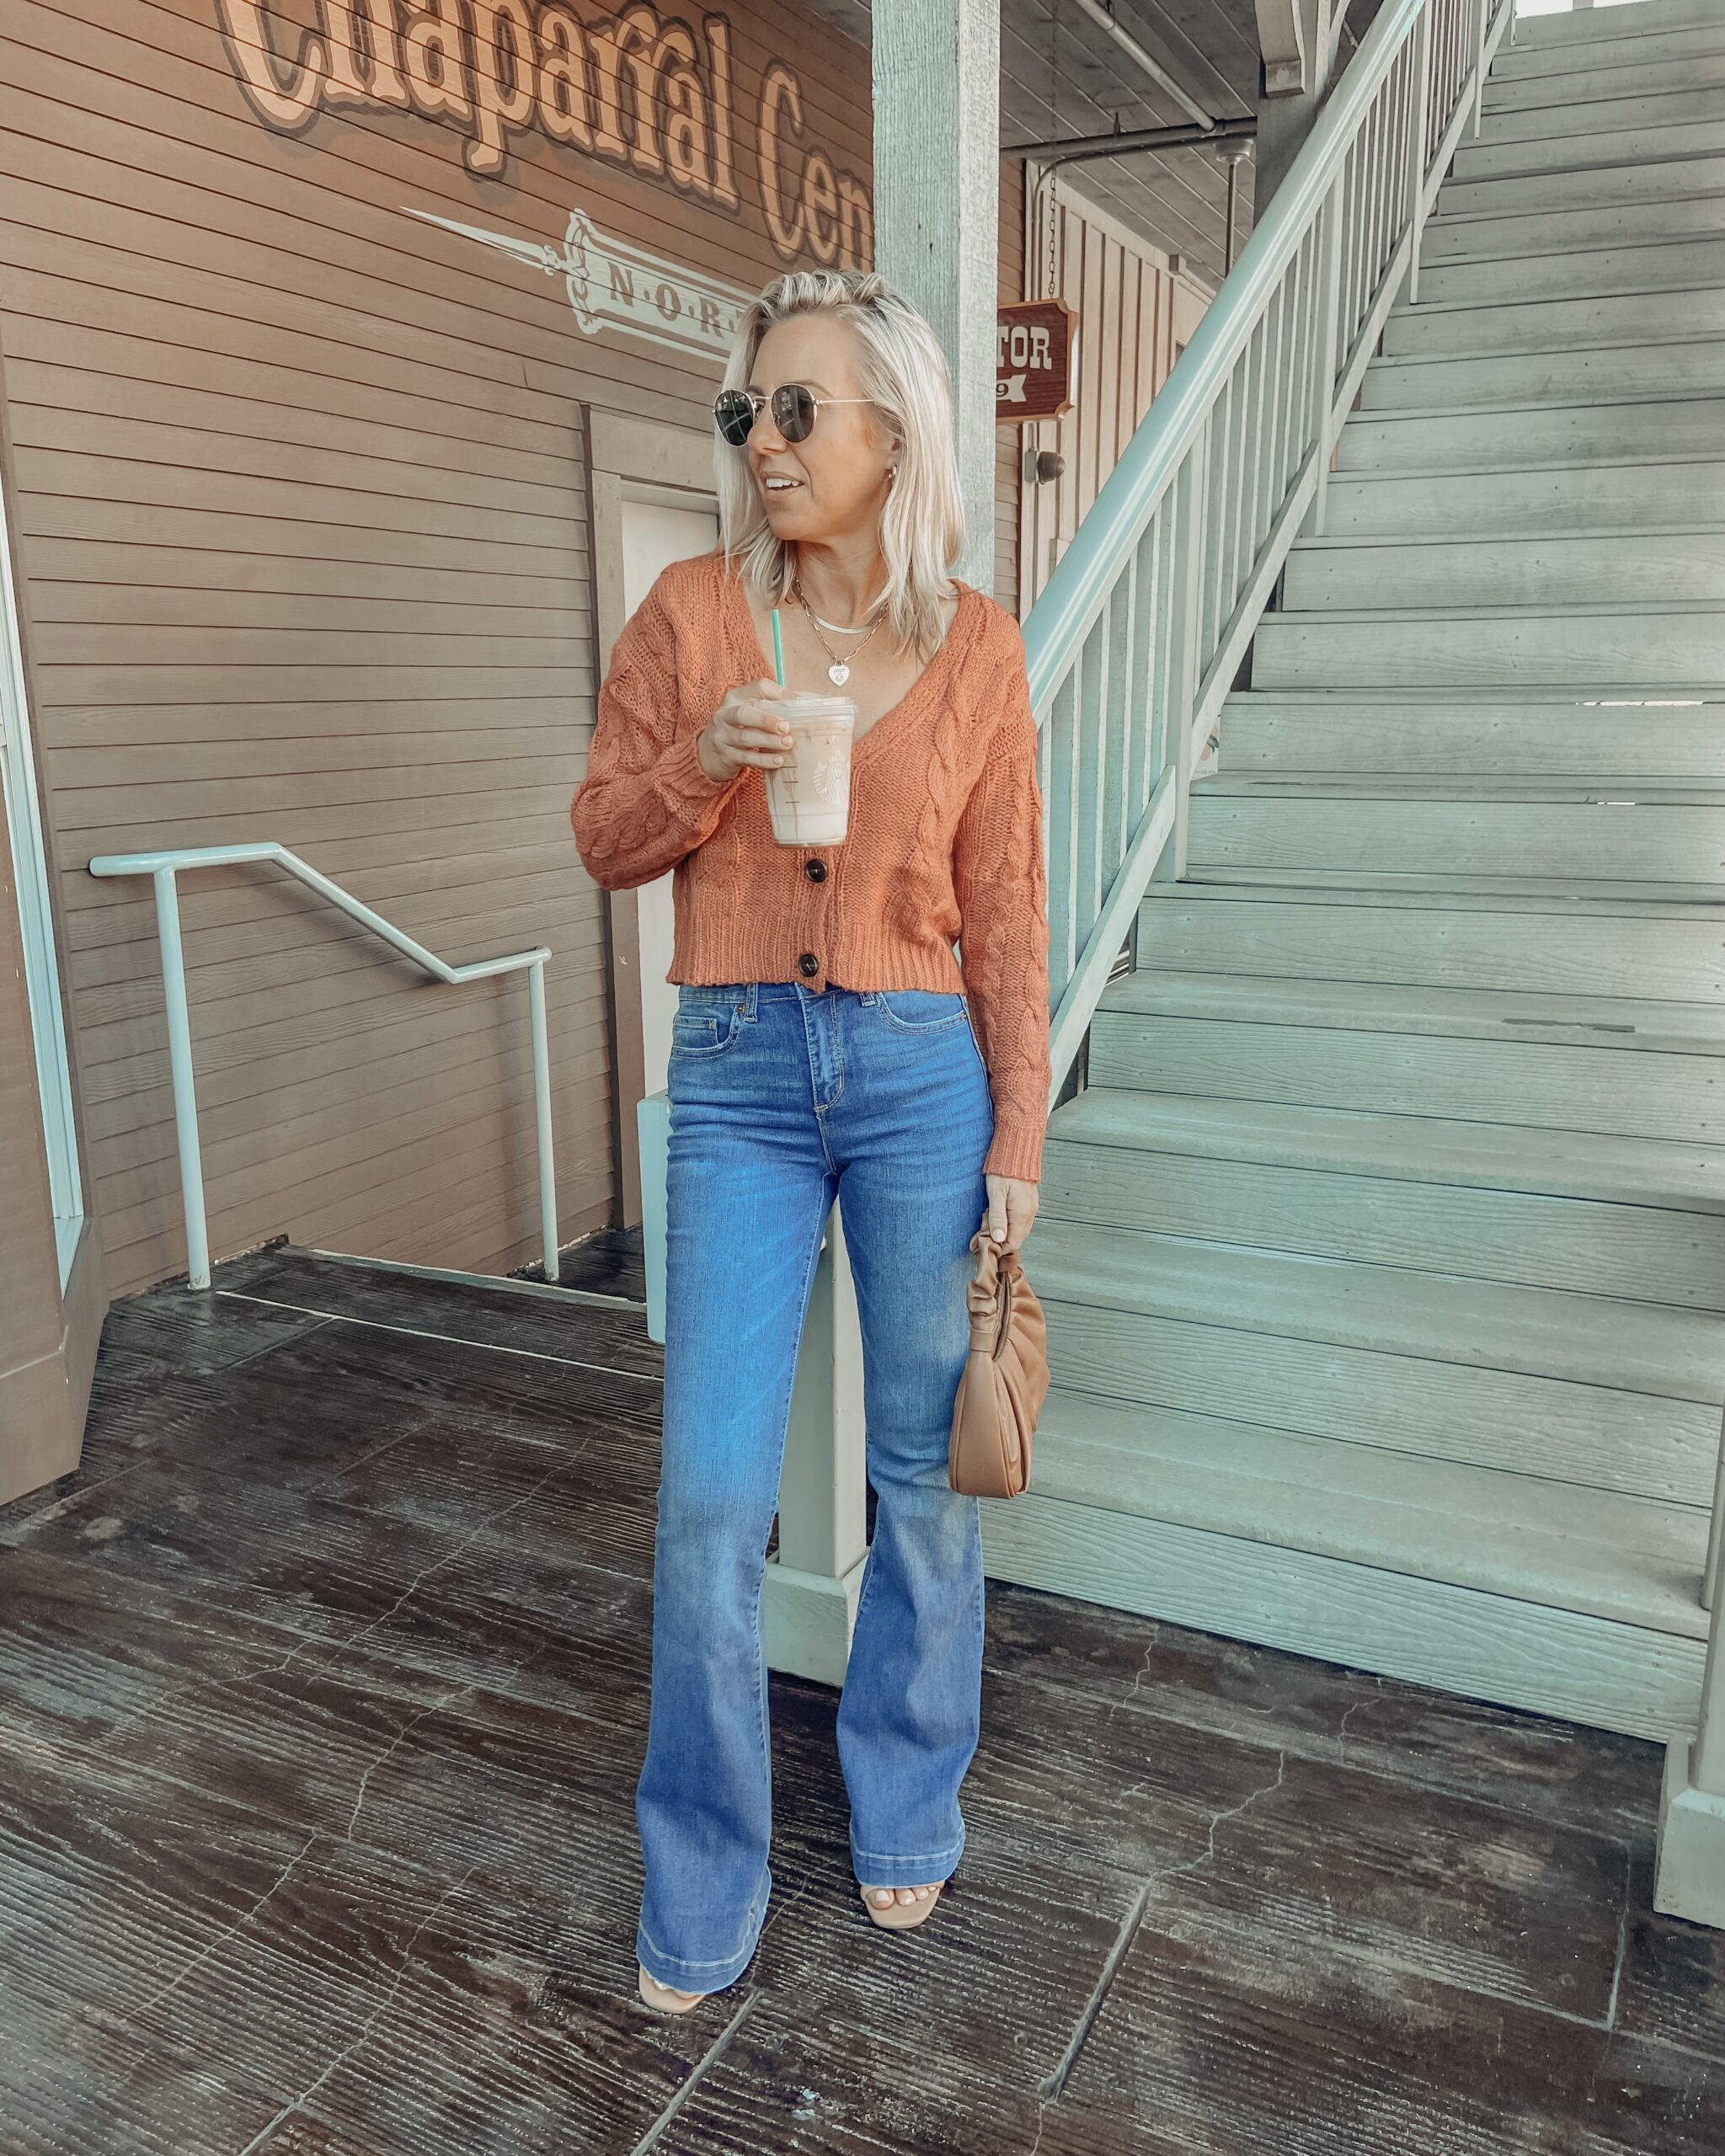 WALMART STYLE FINDS- Jaclyn De Leon Style+ sharing my latest fall style finds from Walmart. Casual cozy sweaters + relaxed denim to chic styles